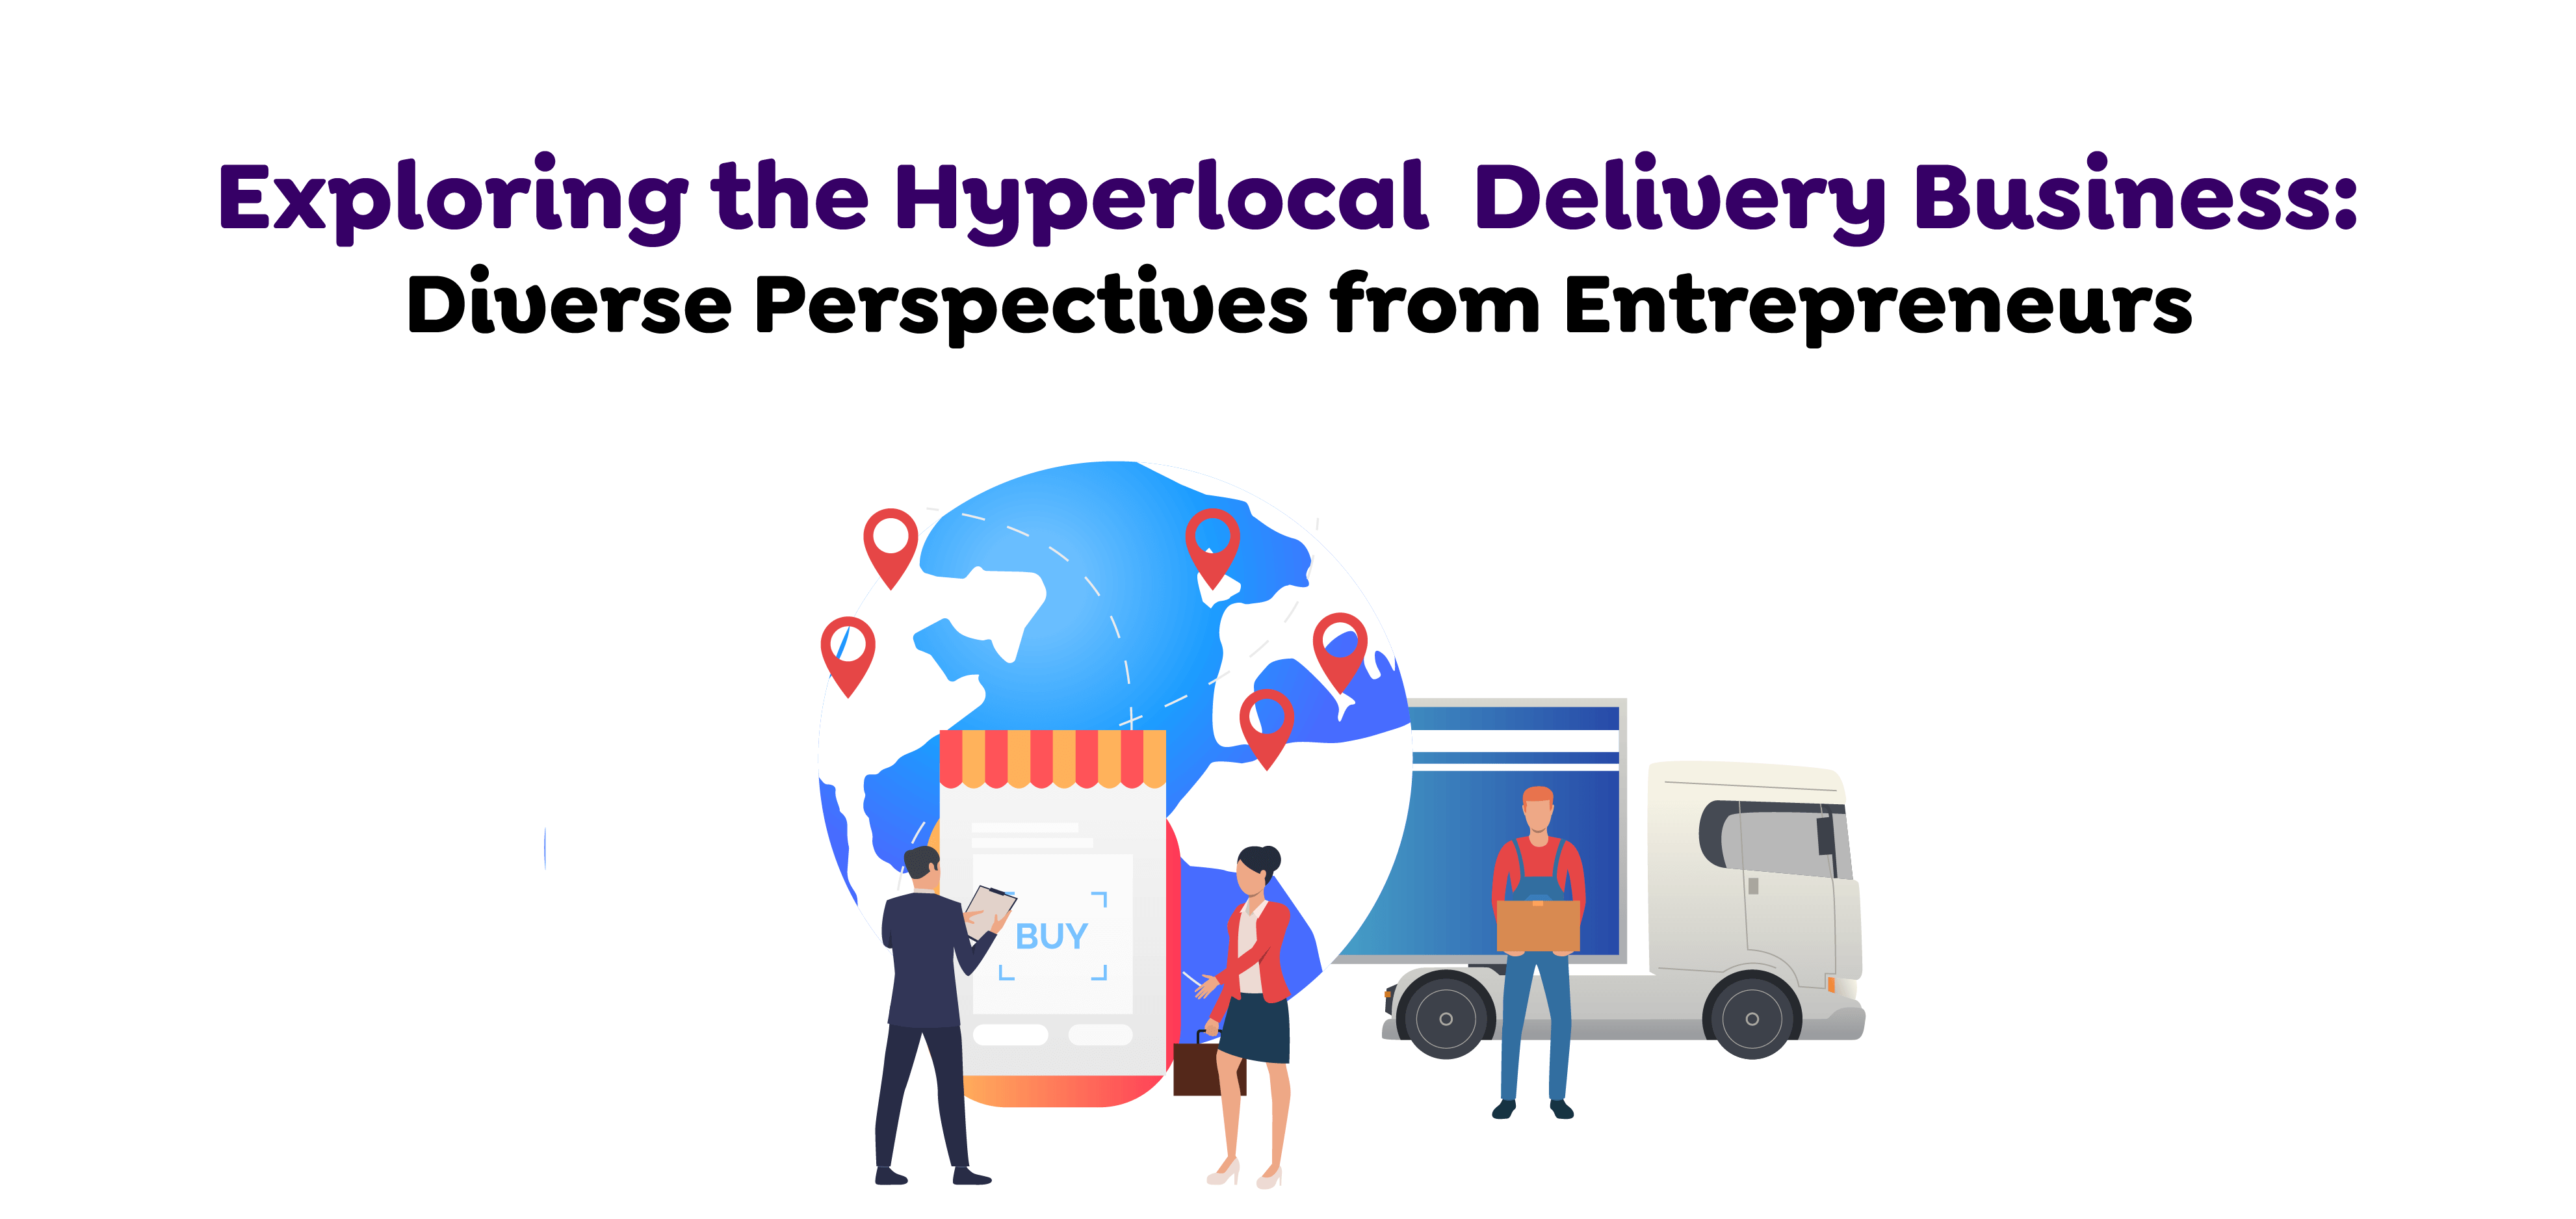 Hyperlocal Delivery Business